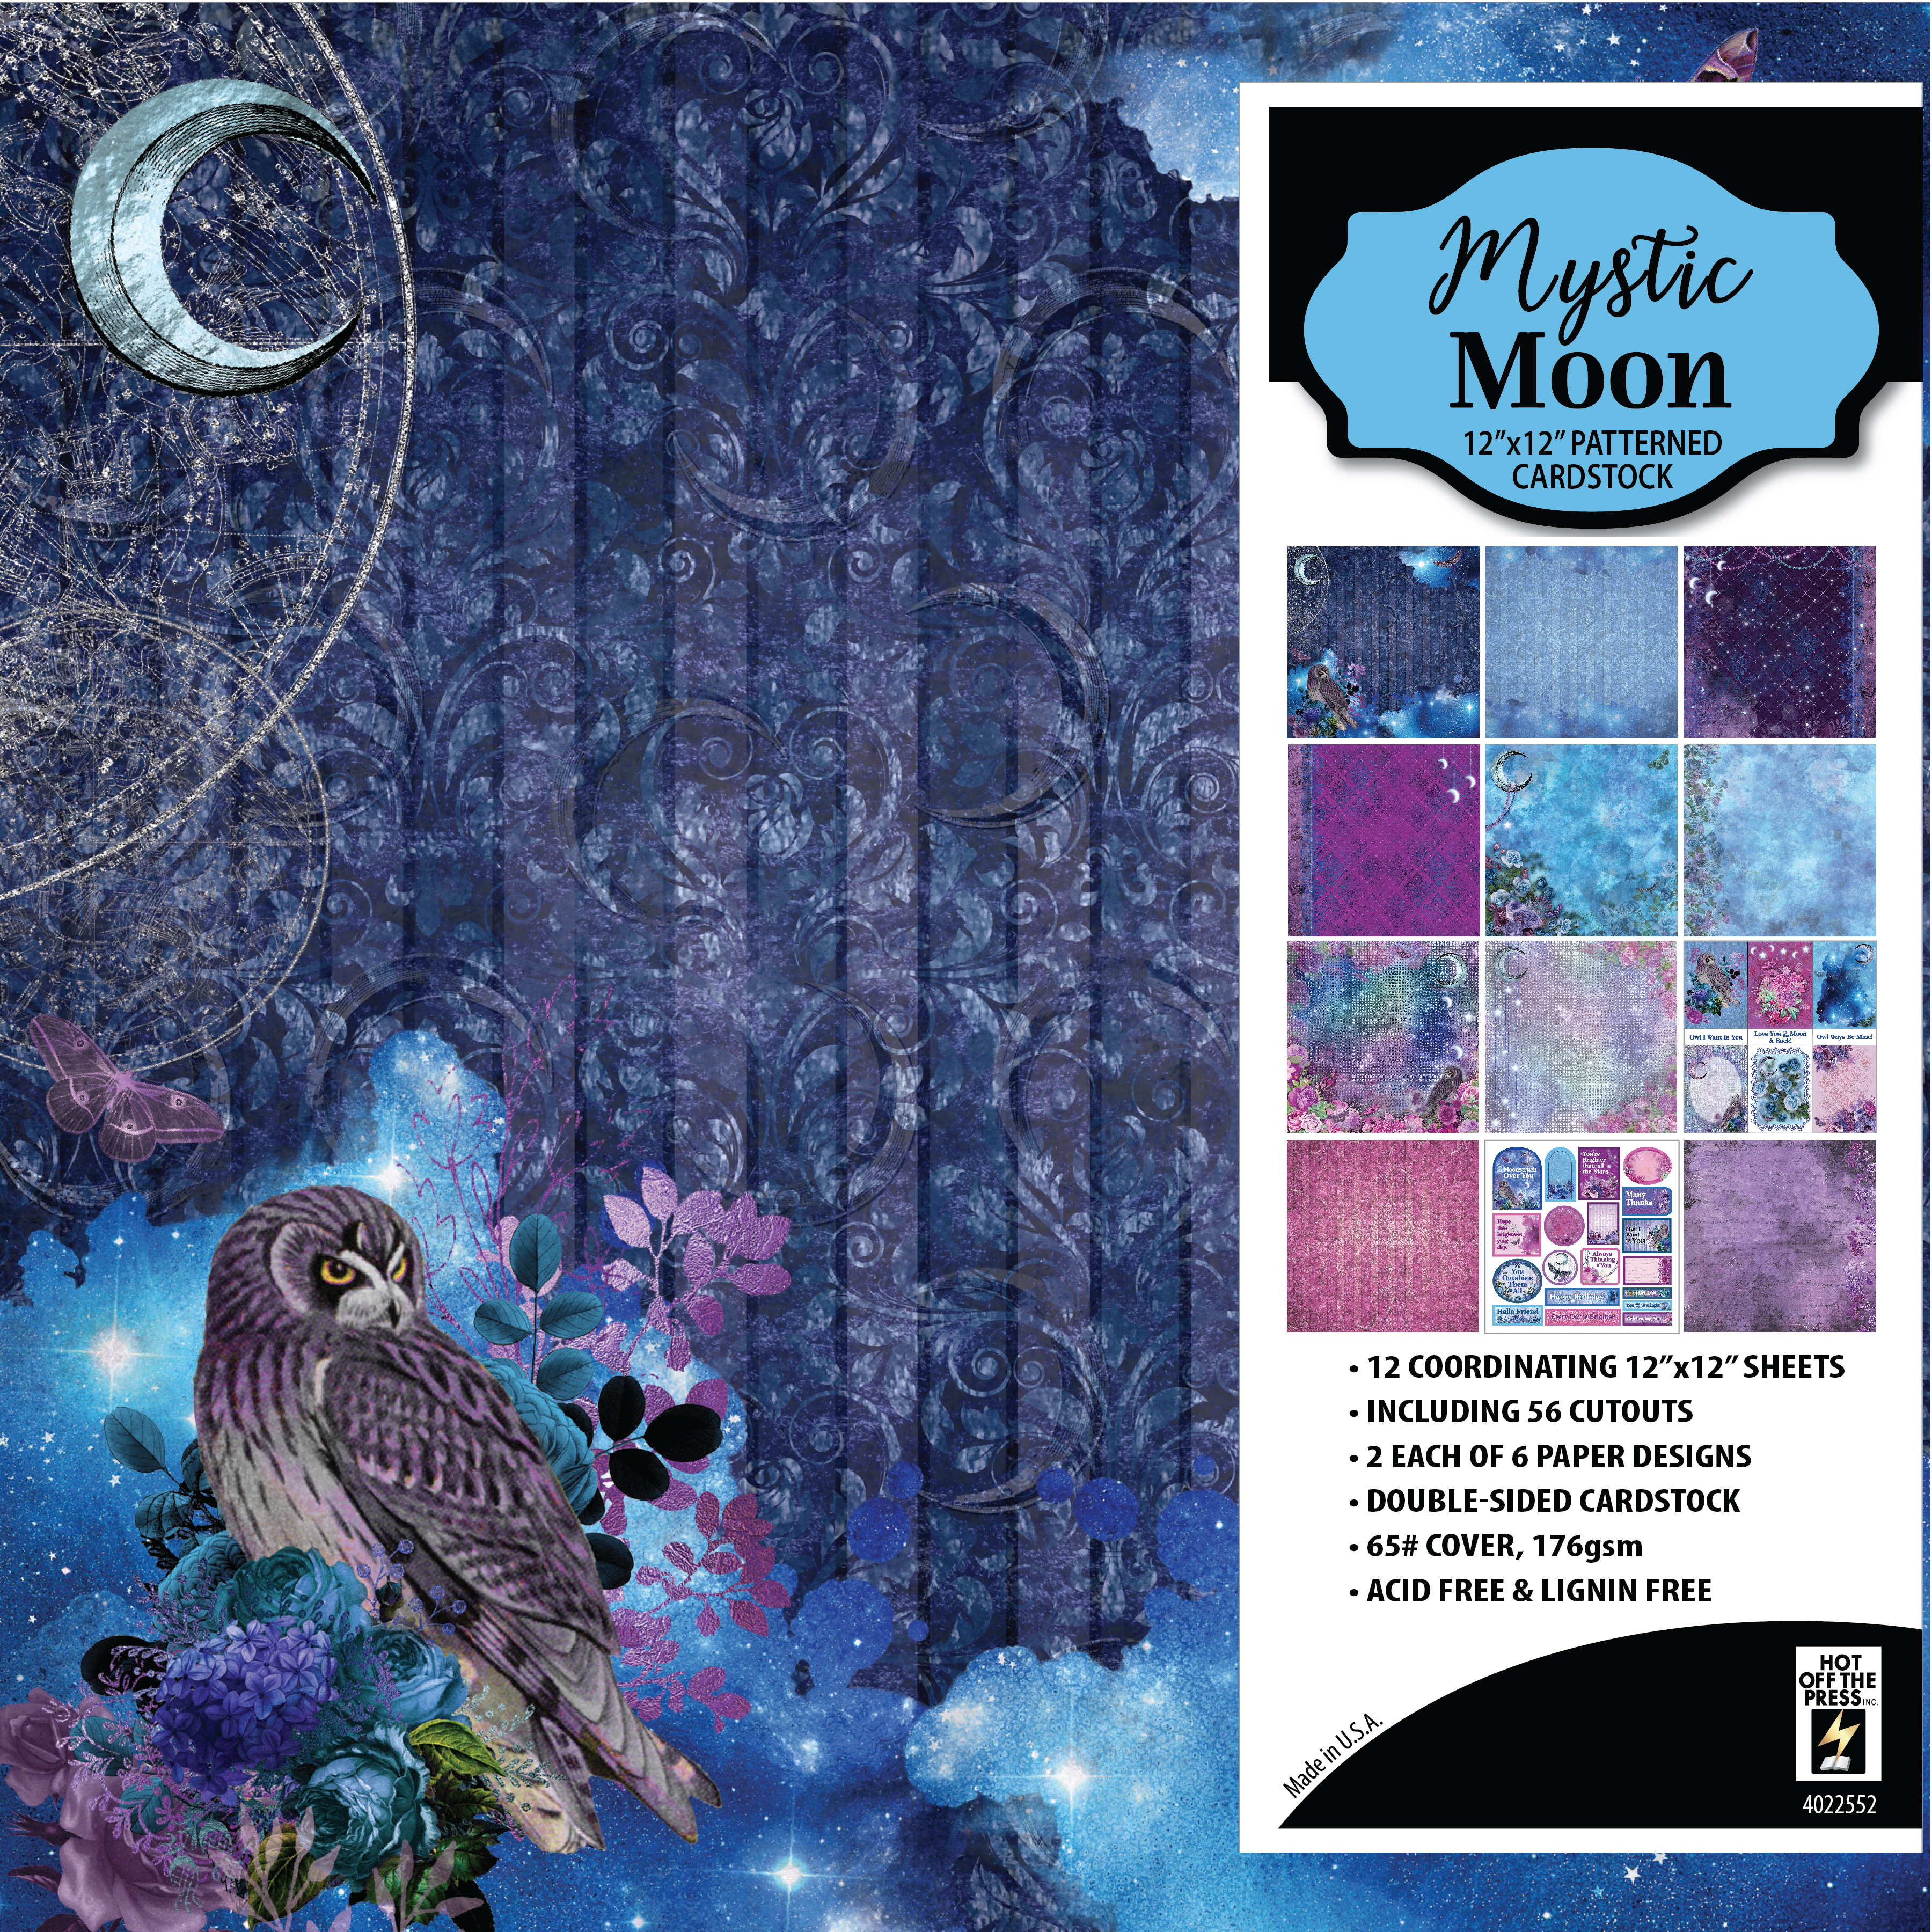 Mystic Moon 12"x12" Patterned Cardstock